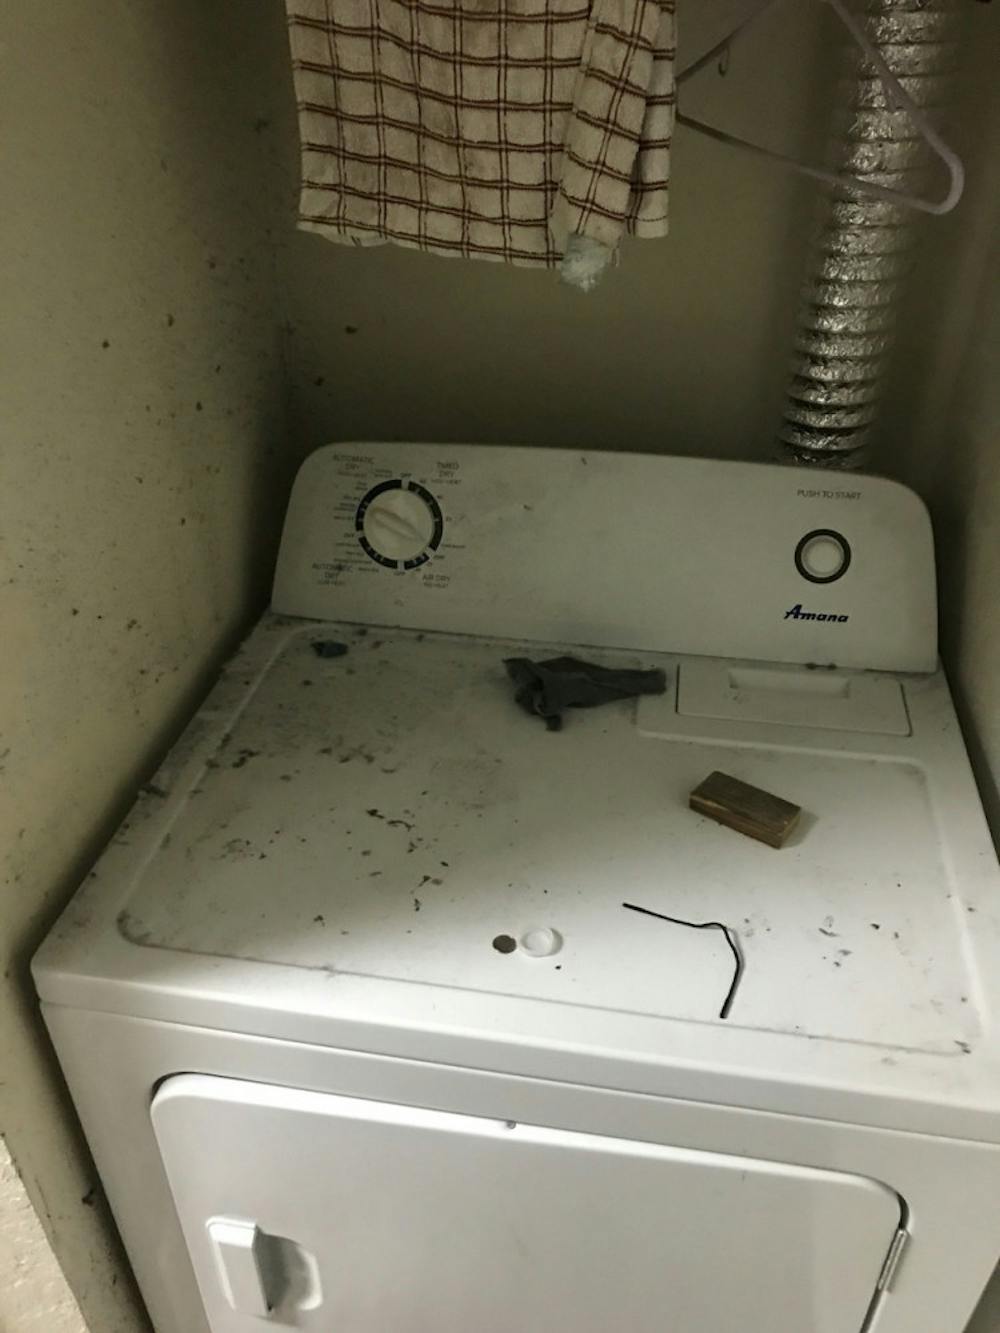 <p><span id="docs-internal-guid-ac1ab394-0d3d-95d2-ce27-bb073c33f066"><span>The washing machine in UF political science junior Herman Younger’s Pavilion on 62nd Apartment is covered with dirt. Younger said his apartment wasn’t cleaned before he moved in.</span></span></p>